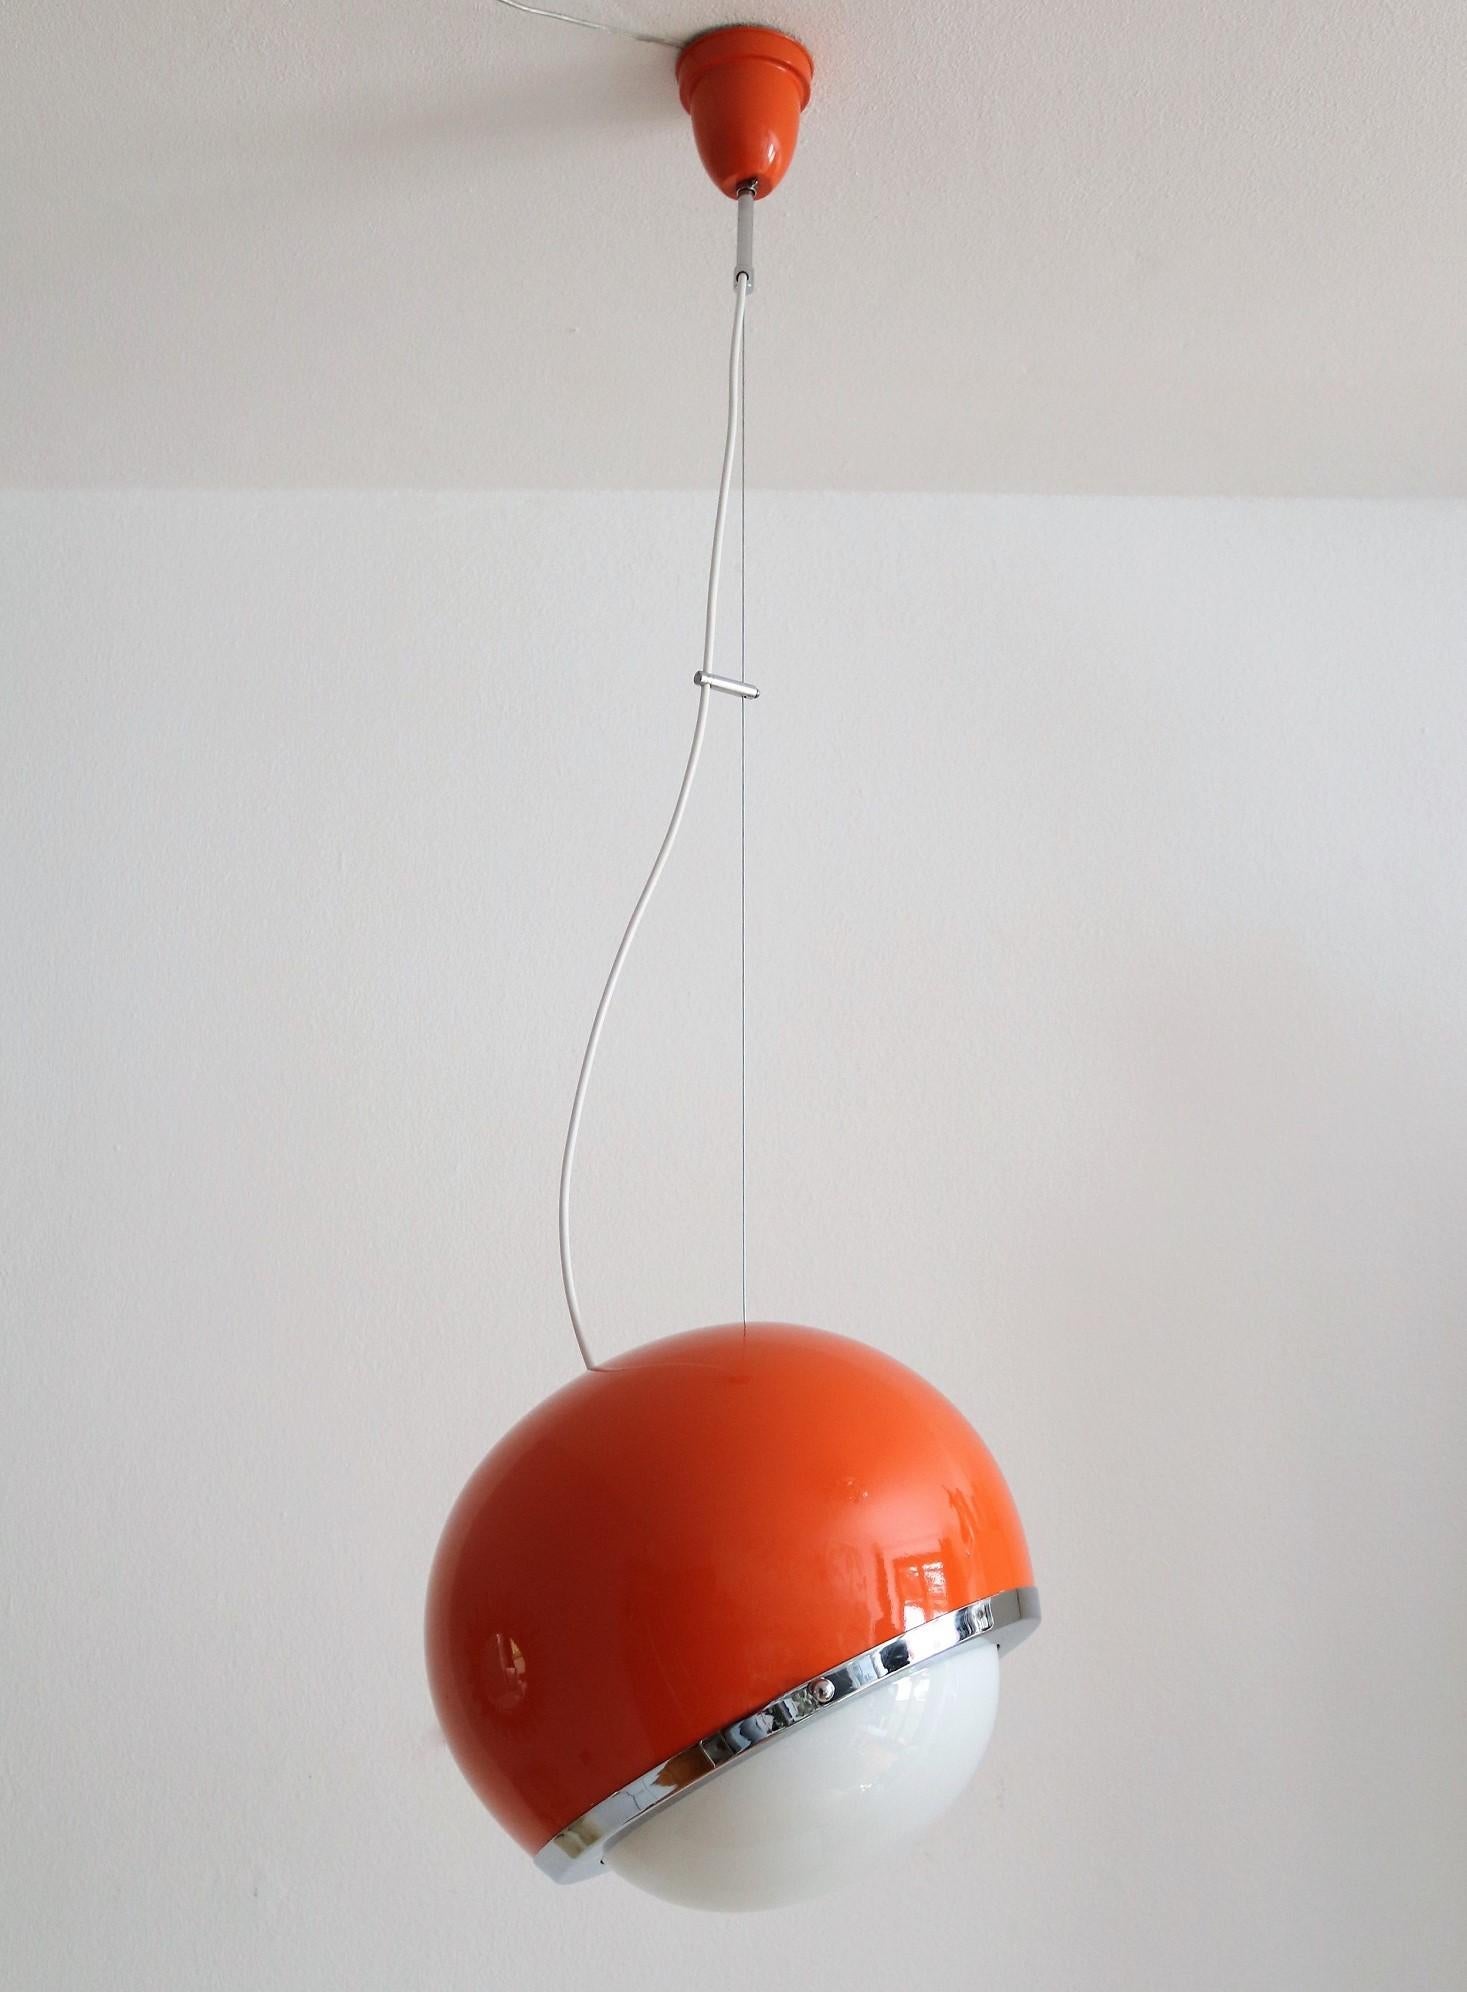 Italian Midcentury Pendant Lamp from the Space Age in Glass and Aluminium, 1960s For Sale 8